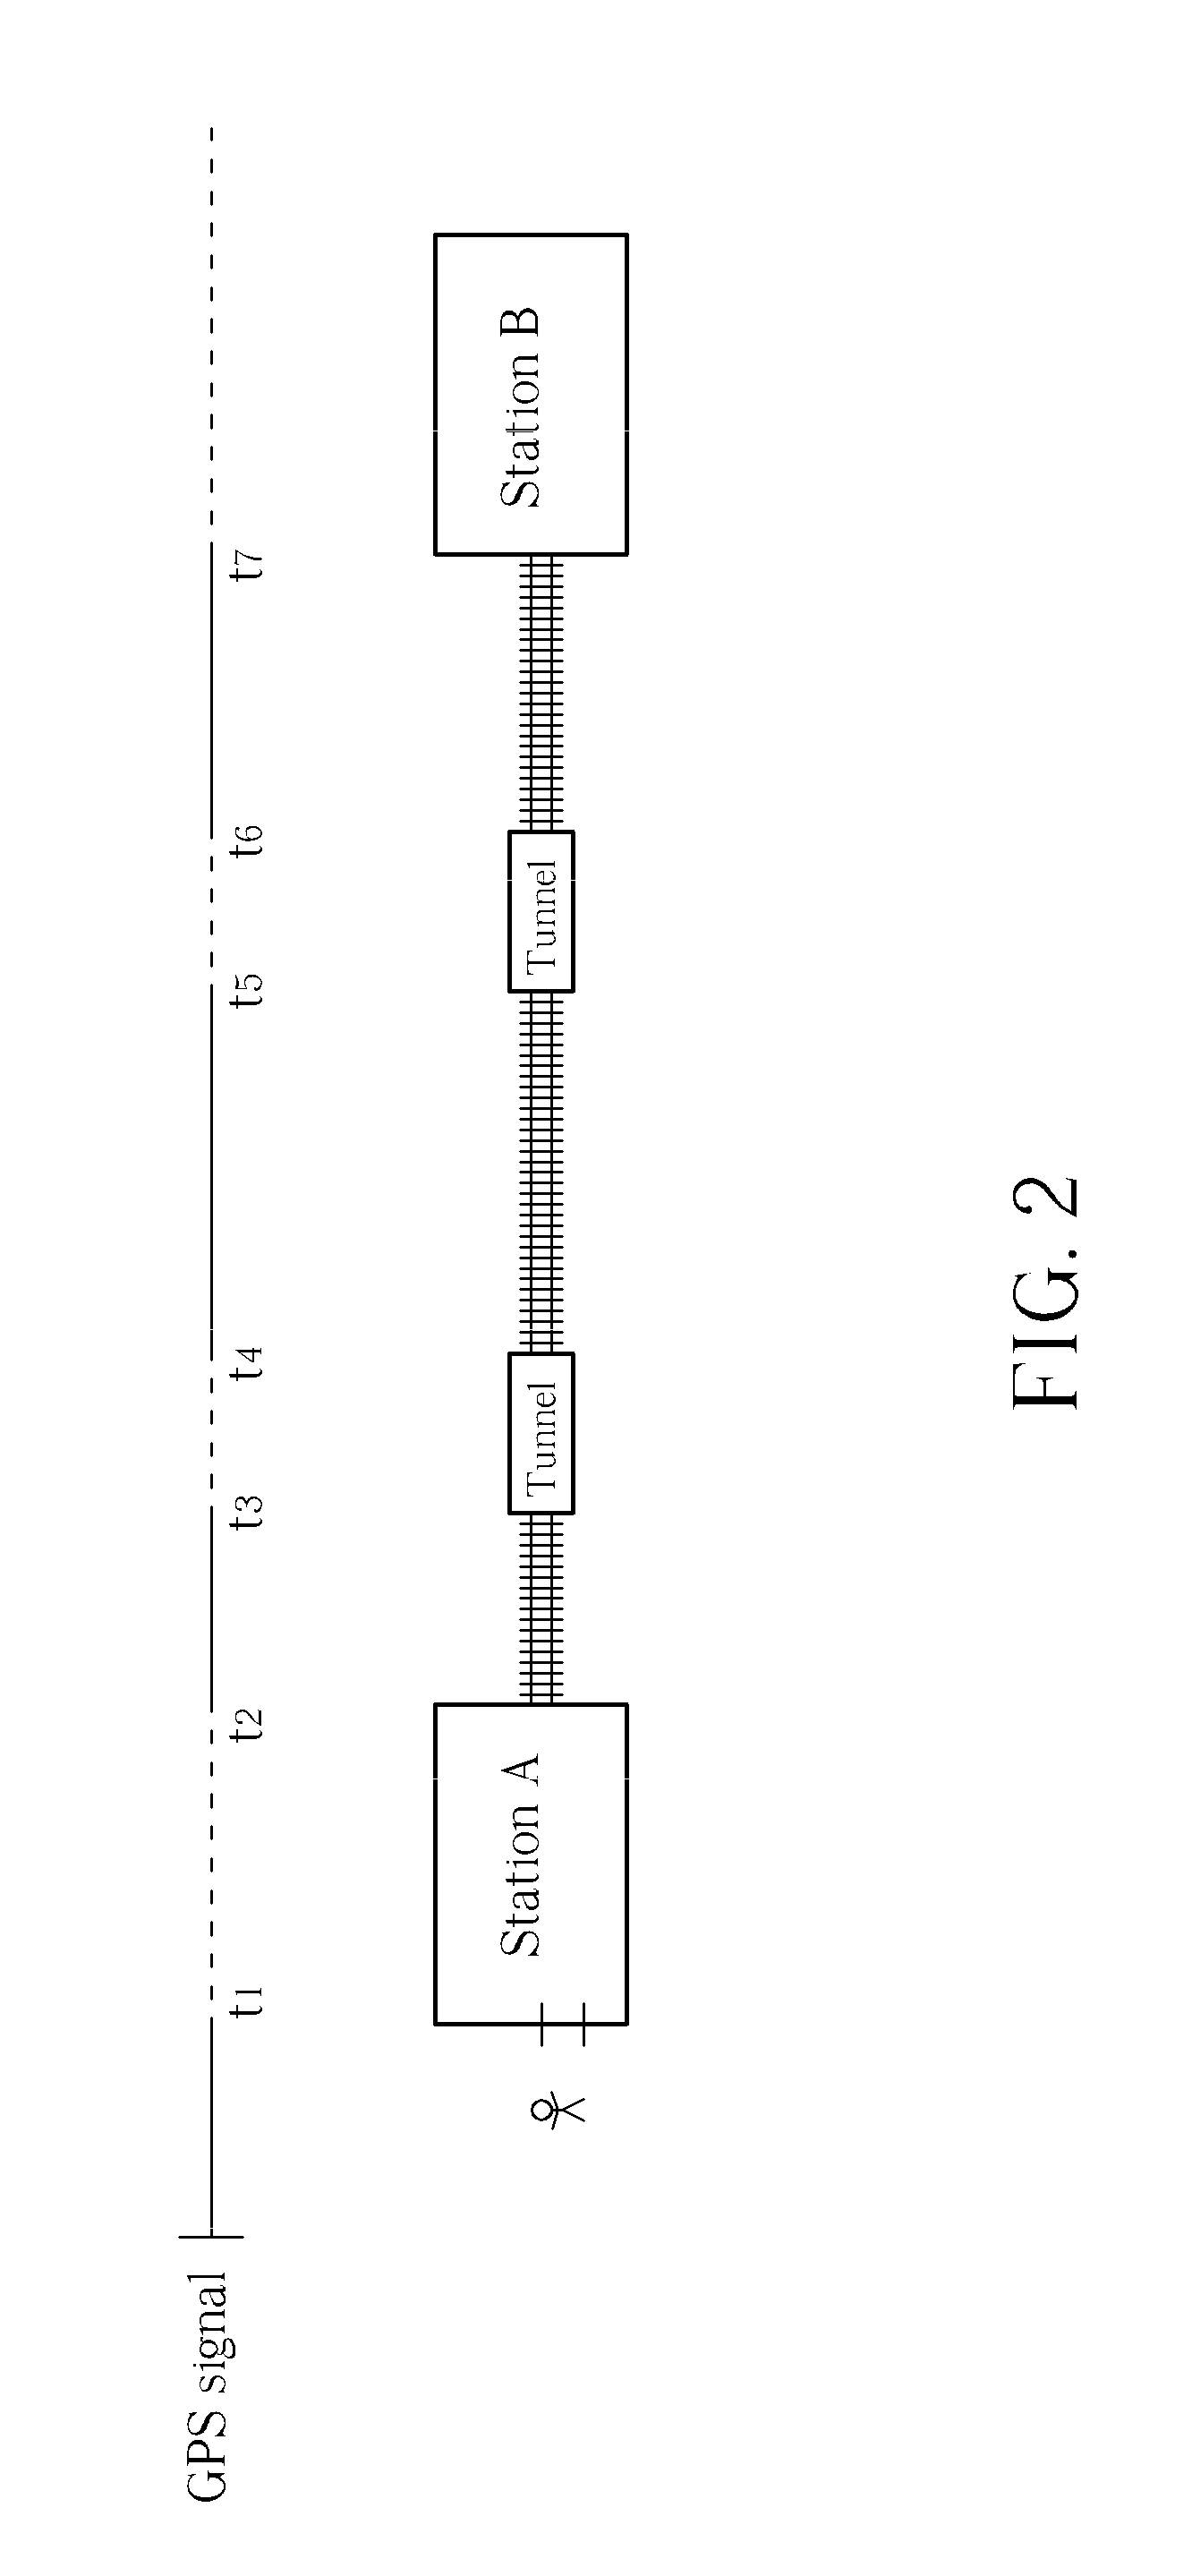 Method of Determining Mode of Transportation in a Personal Navigation Device